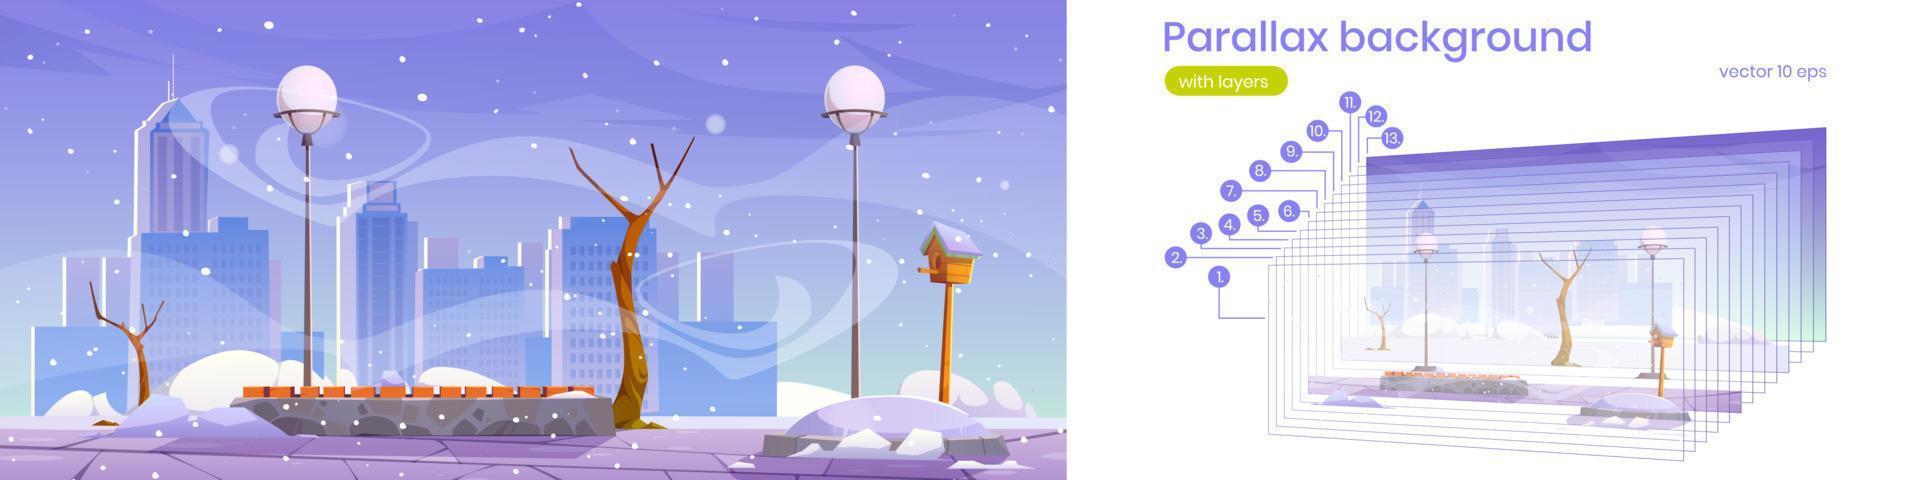 Parallax background winter park separated layers vector